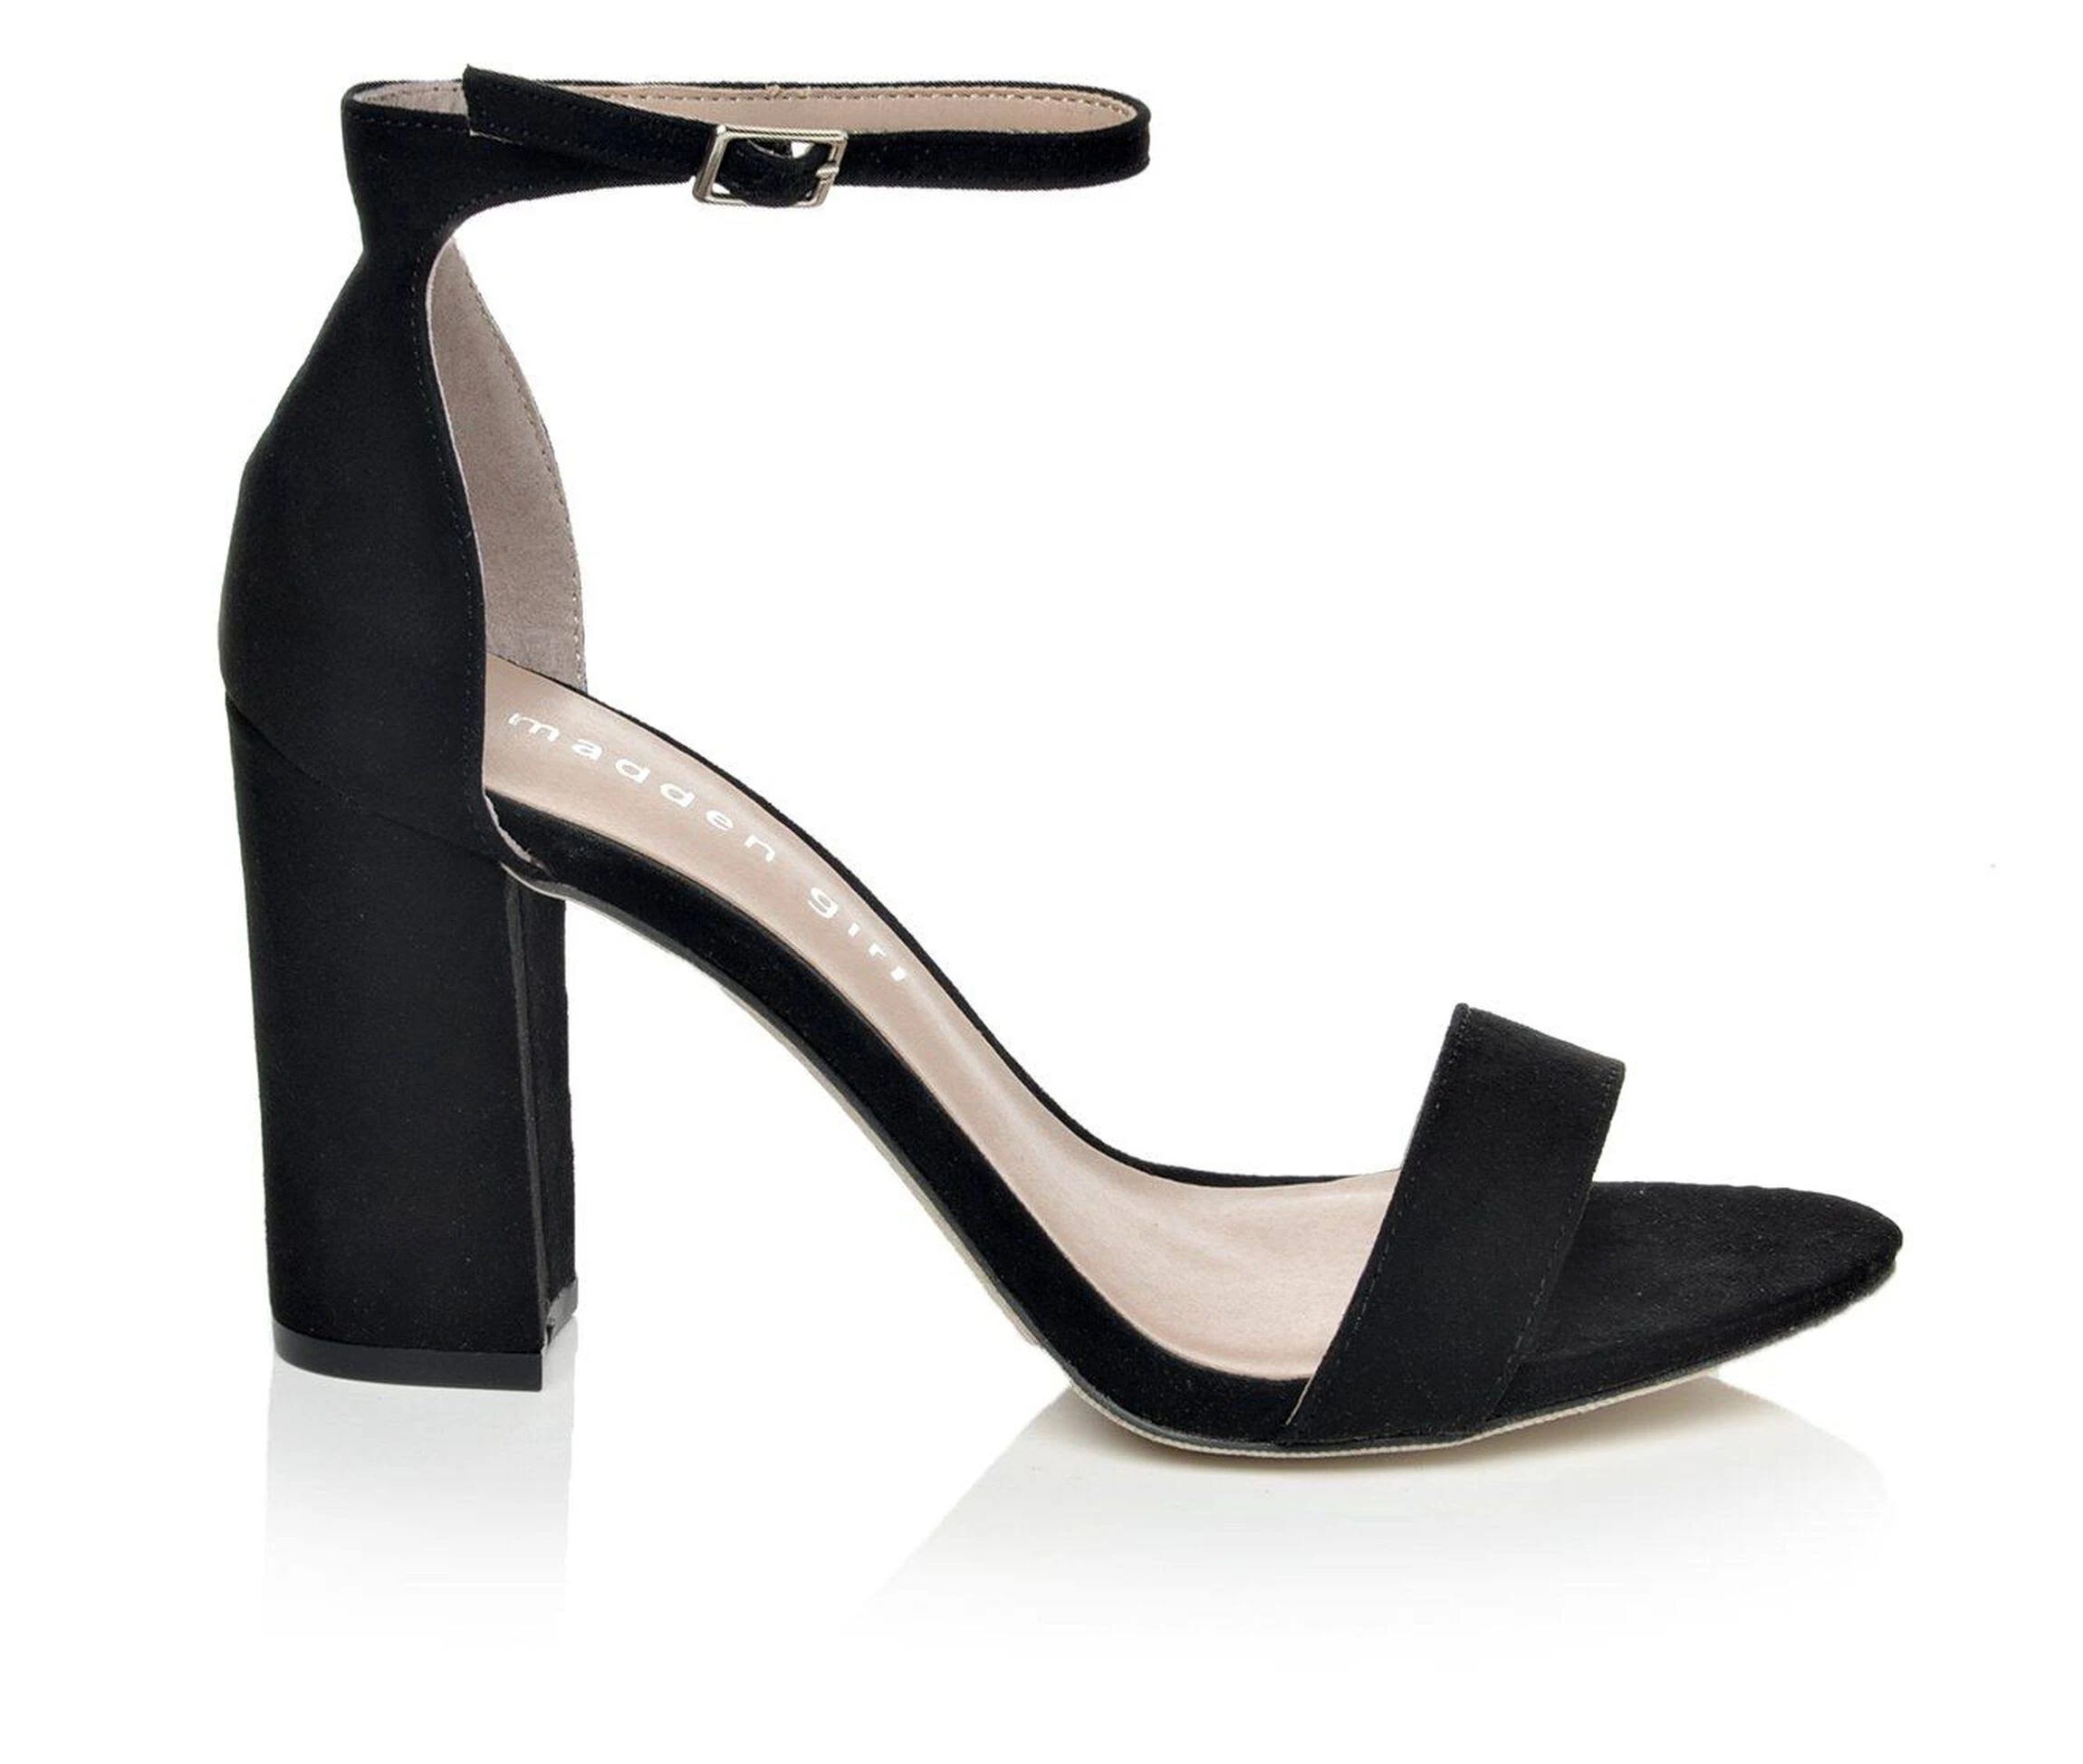 Madden Girl Beella - Adjustable Black Heels for Prom with Buckle Straps | Image